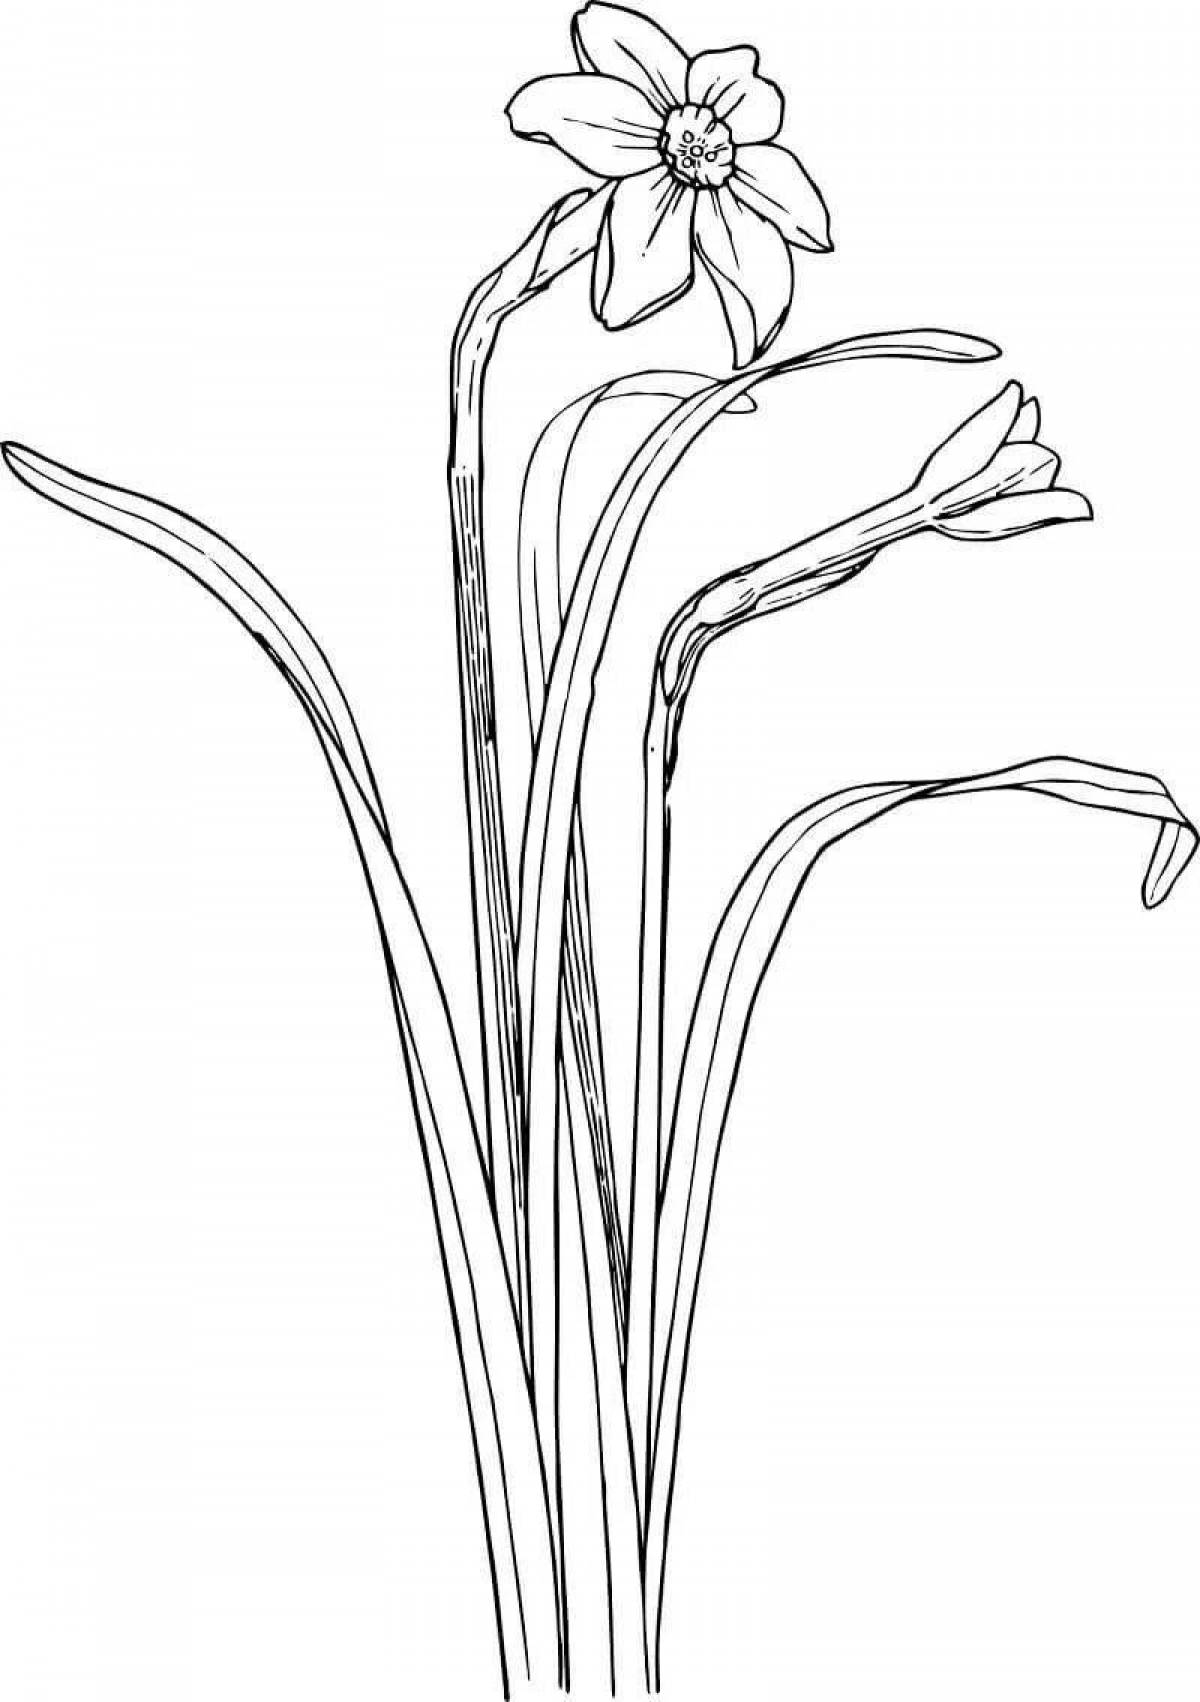 Coloring page glorious narcissus flower